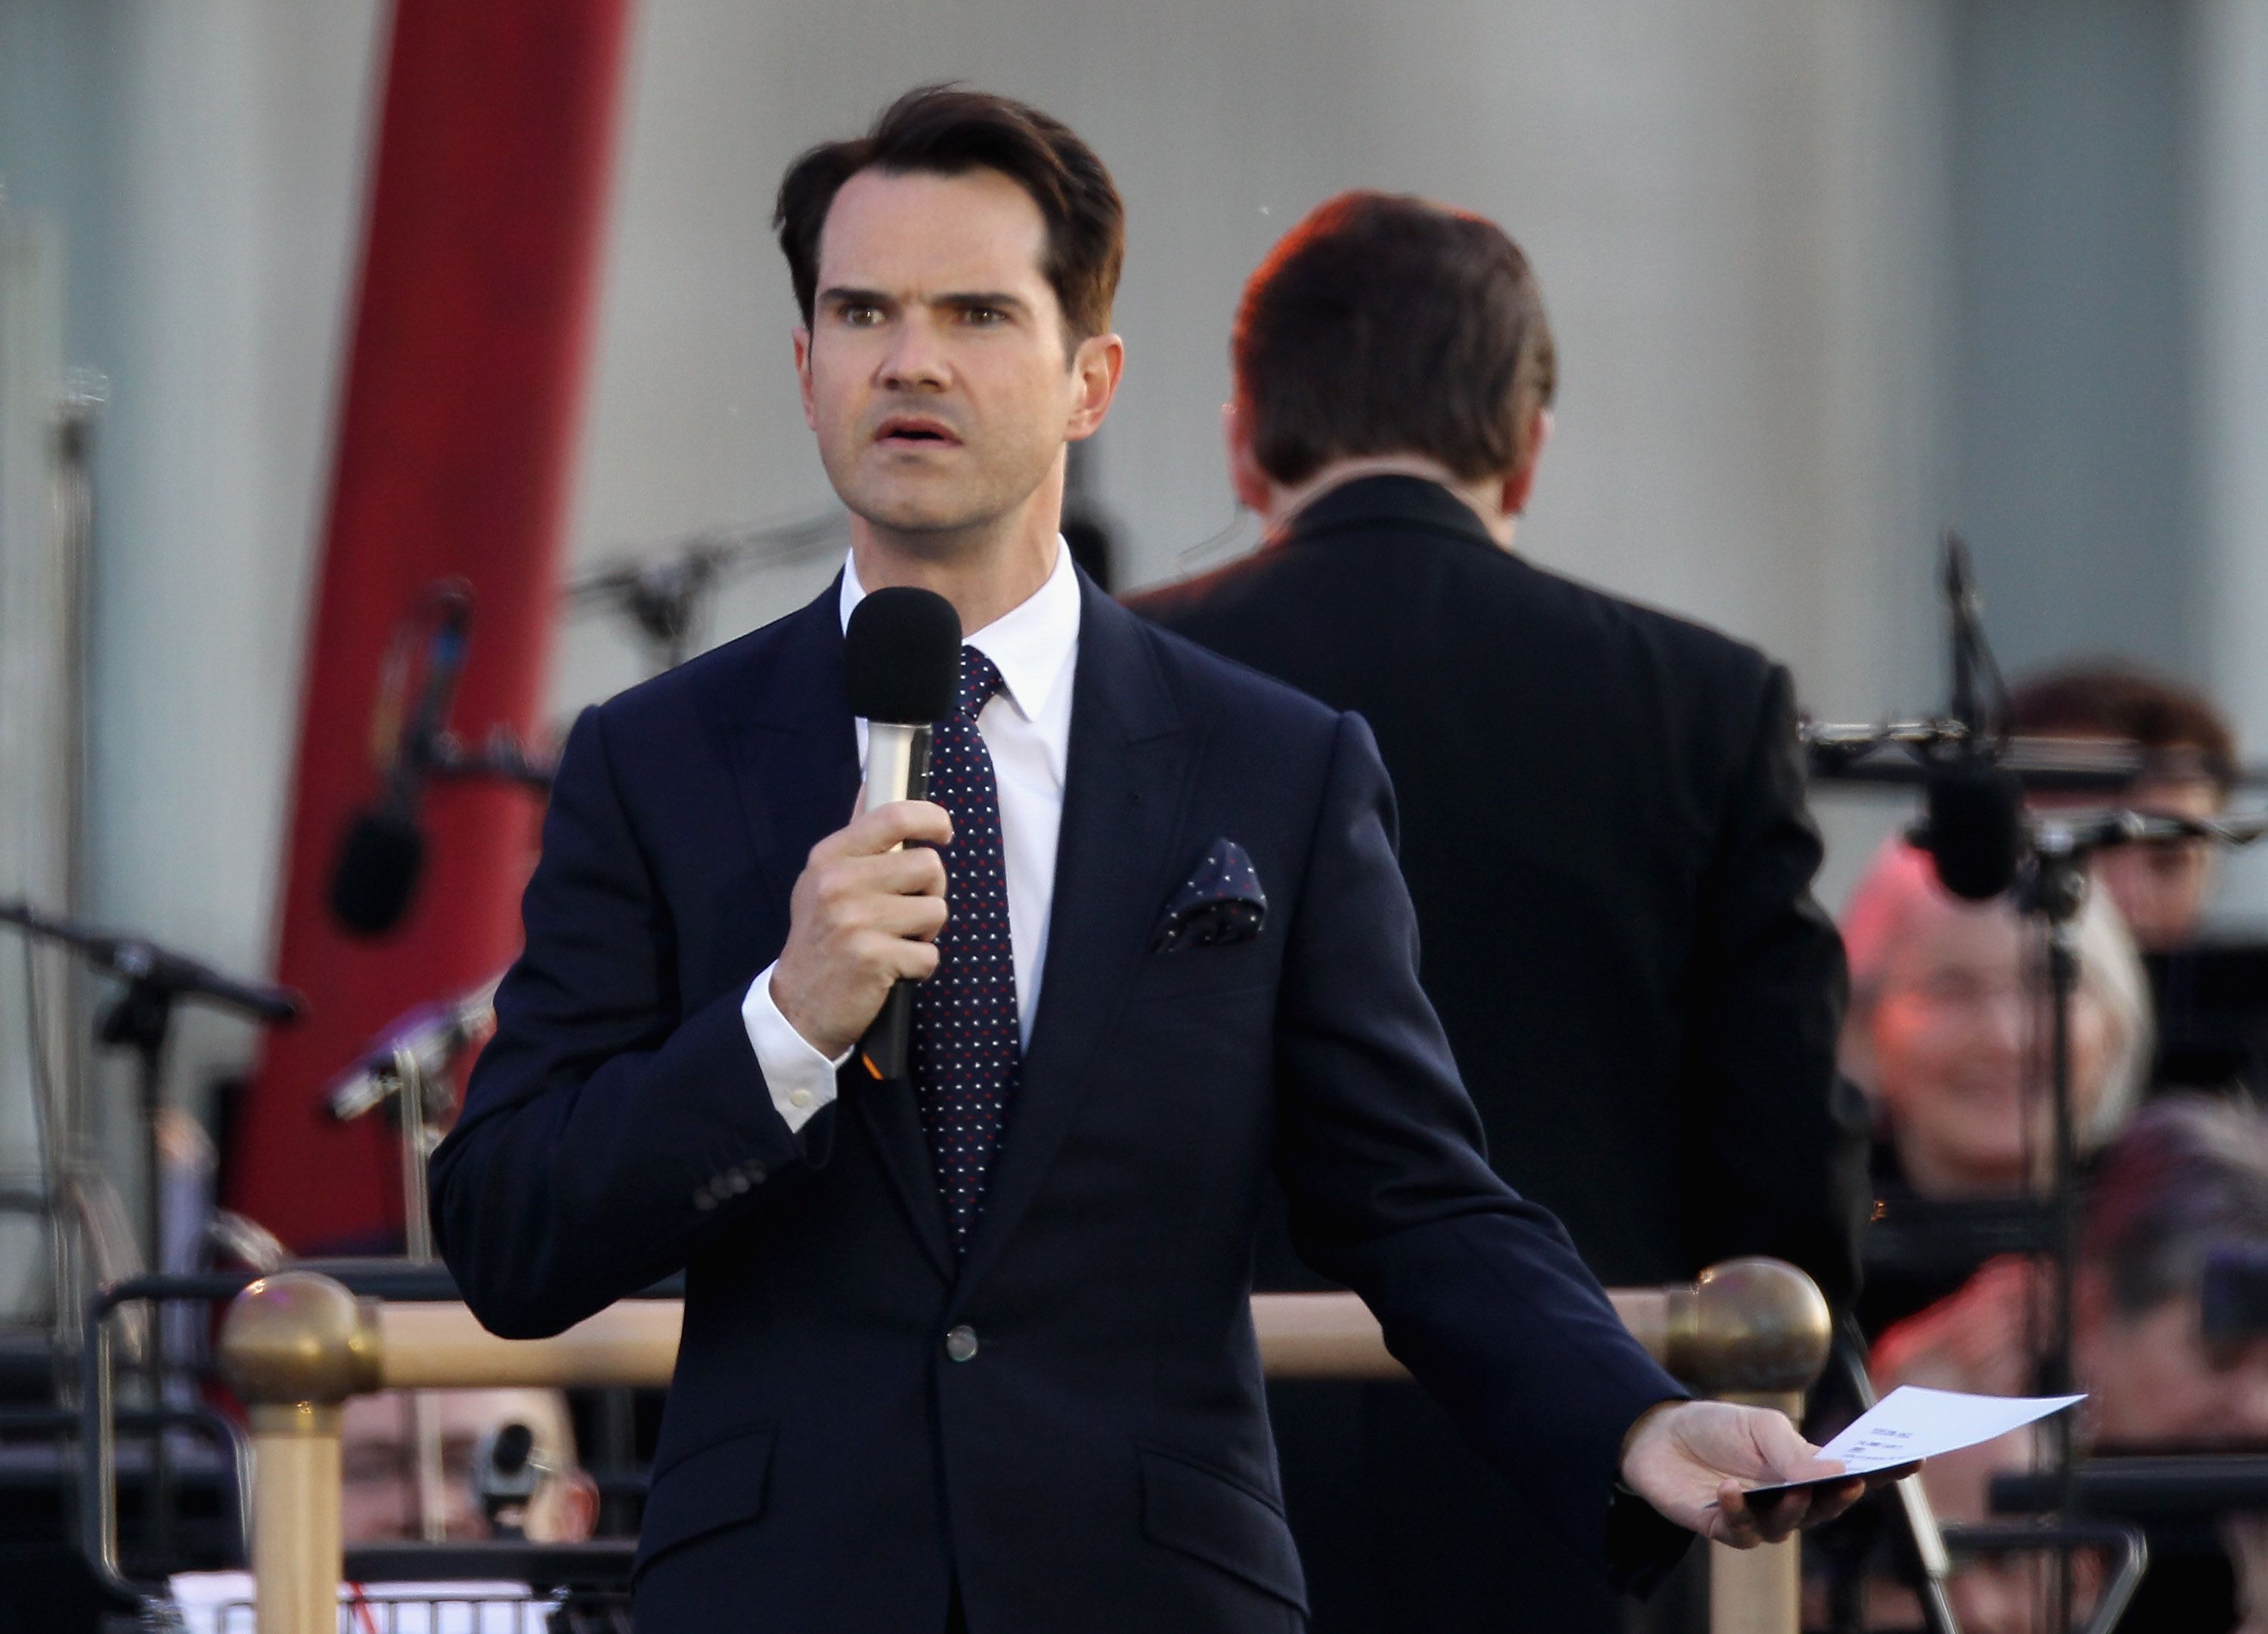 LONDON, ENGLAND - JUNE 04: Presenter Jimmy Carr on stage during the Diamond Jubilee concert at Buckingham Palace on June 4, 2012 in London, England. For only the second time in its history the UK celebrates the Diamond Jubilee of a monarch. Her Majesty Queen Elizabeth II celebrates the 60th anniversary of her ascension to the throne. Thousands of well-wishers from around the world have flocked to London to witness the spectacle of the weekend?s celebrations. (Photo by Dan Kitwood/Getty Images)